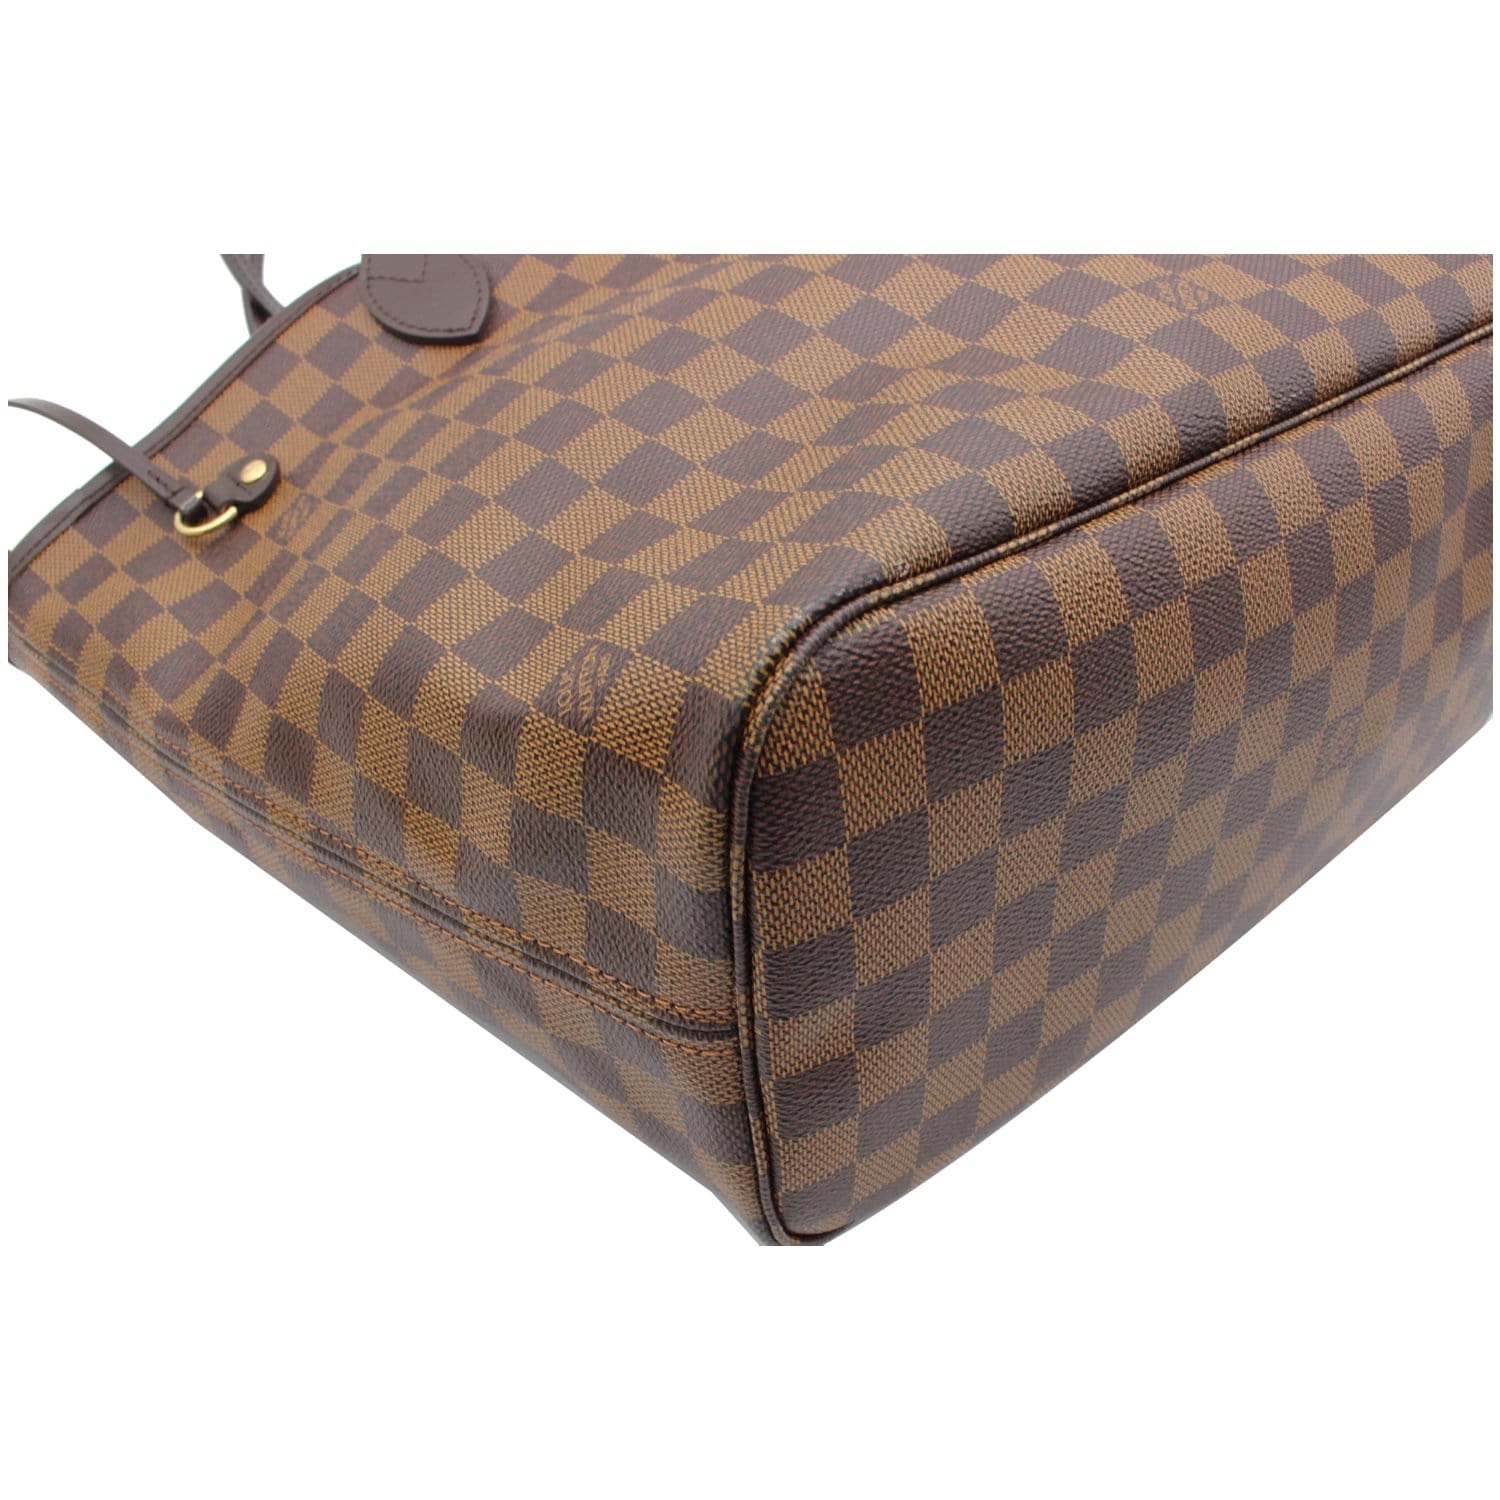 Authentic Louis Vuitton Damier Neverfull MM Tote Bag N51105 LV